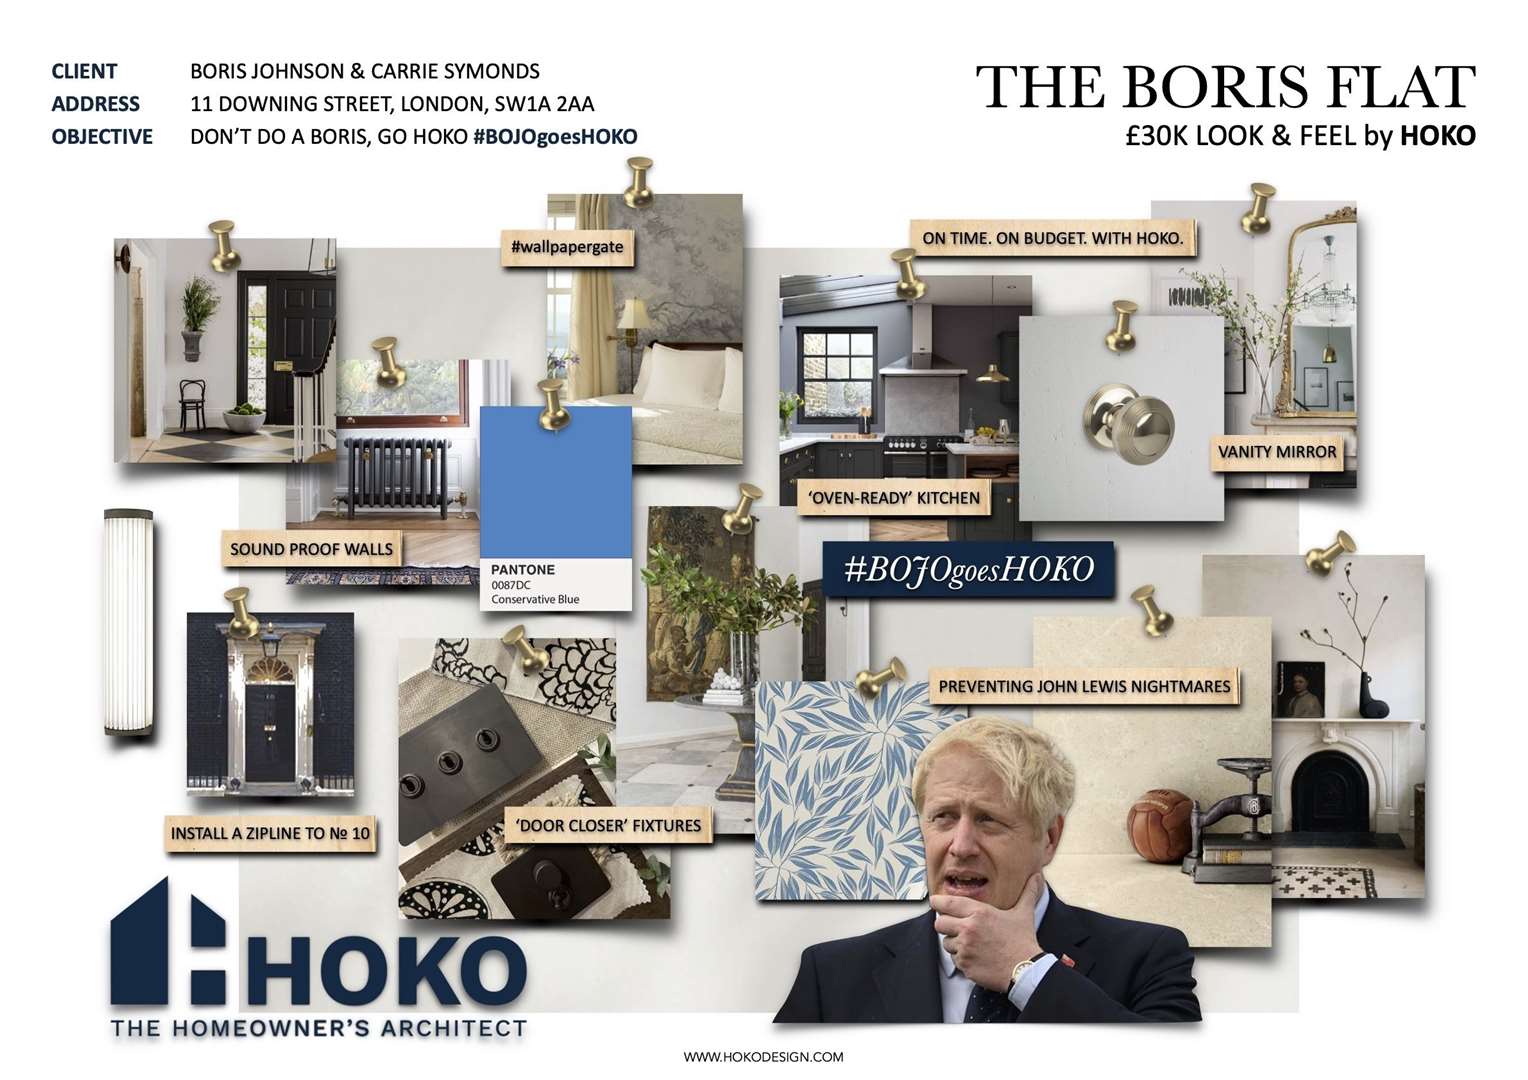 HOKO architects tell Boris Johnsone they could have refurbished 11 Downing Street for £30,000